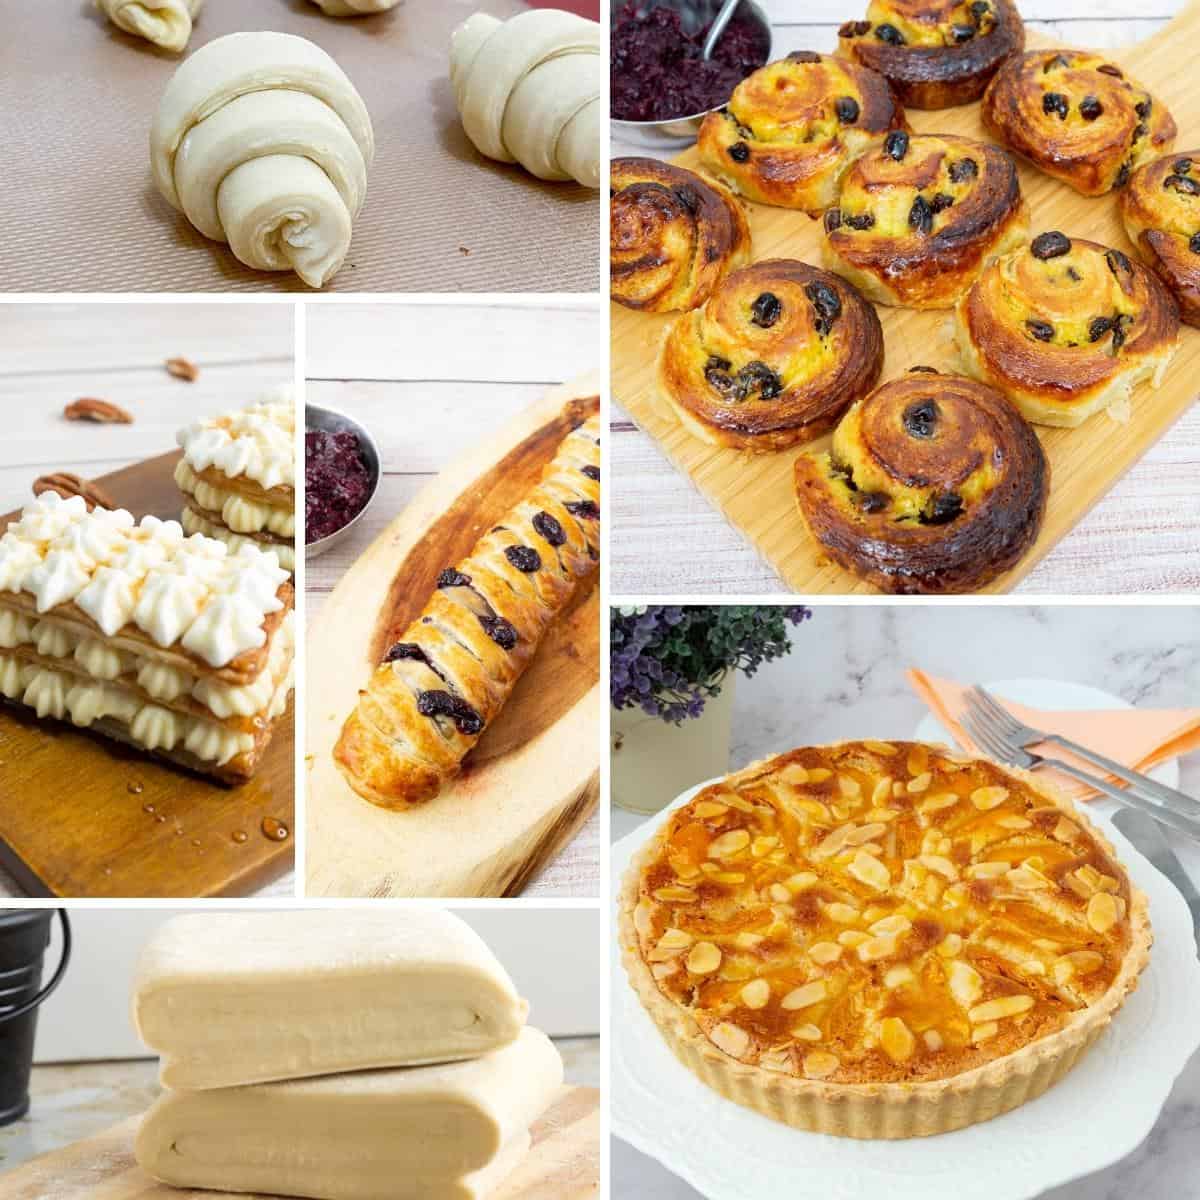 Collage of pastries for the free online pastry course.